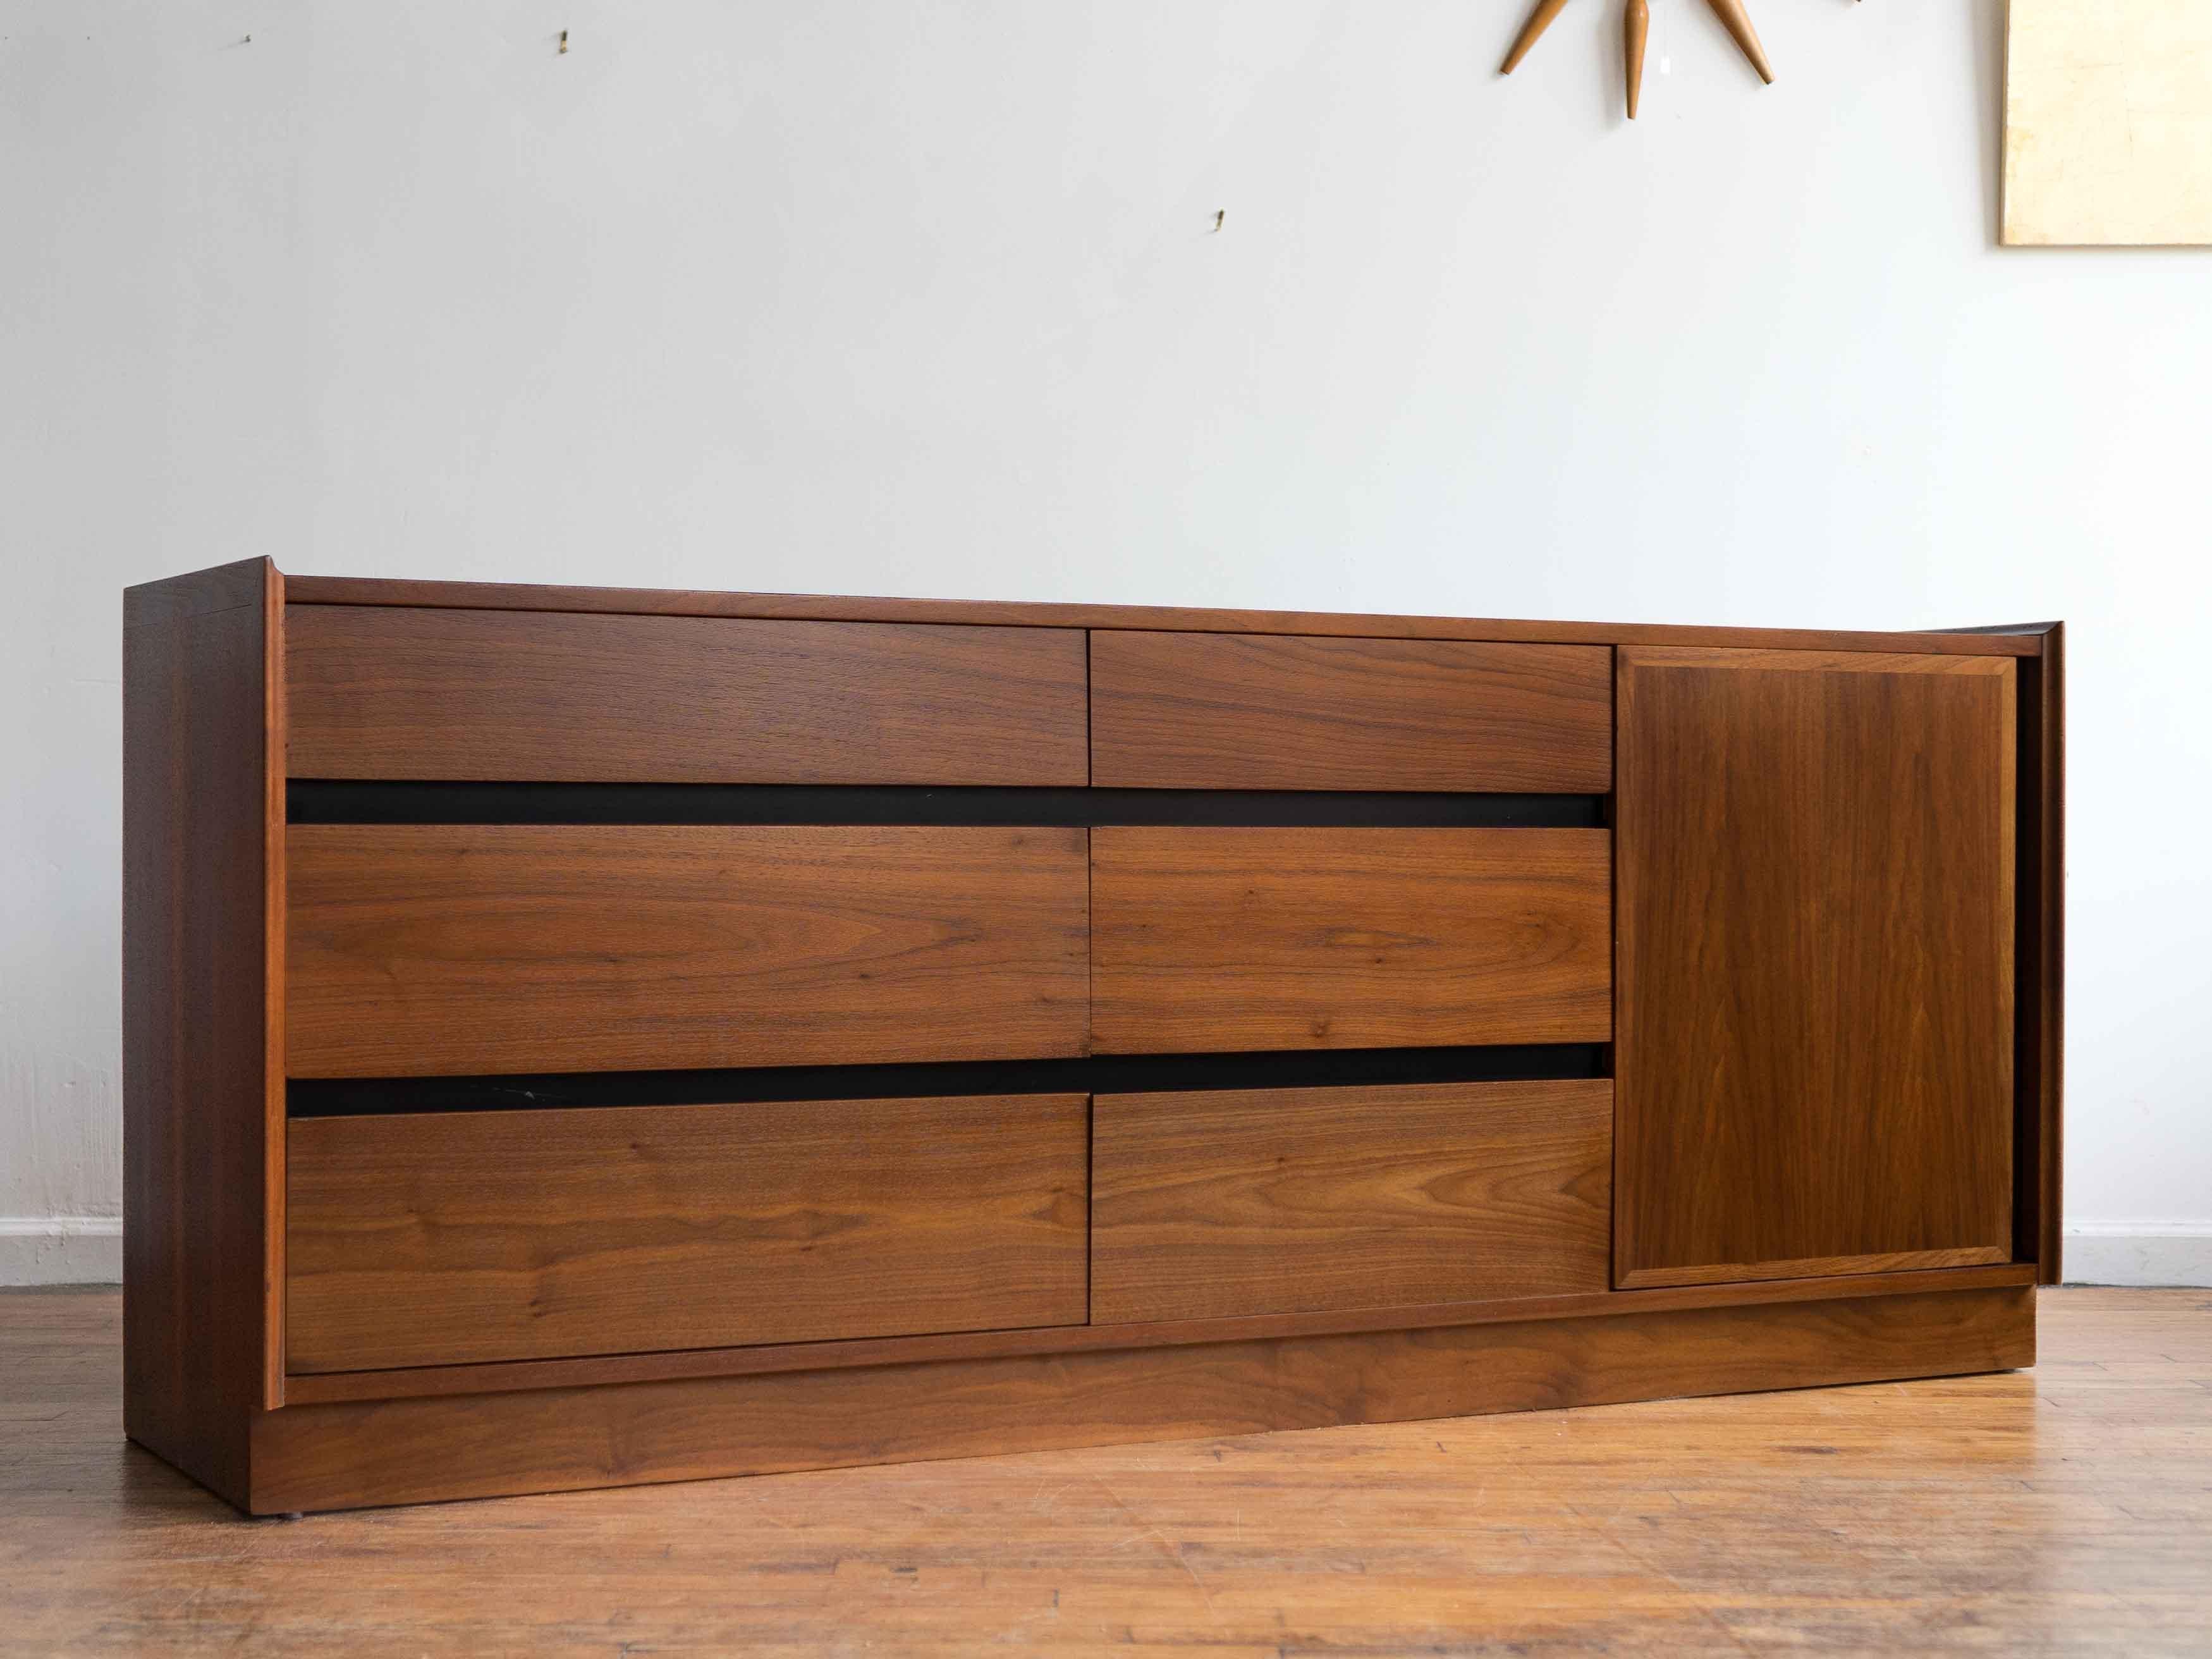 Please inquire for shipping rates. 

72” x 18.5” x 29.5”H

Classing 9 drawer lowboy designed by Merton Gershun for Dillingham's Esprit line. Walnut body and drawers with figured grain running continuously across the drawer fronts; black lacquered